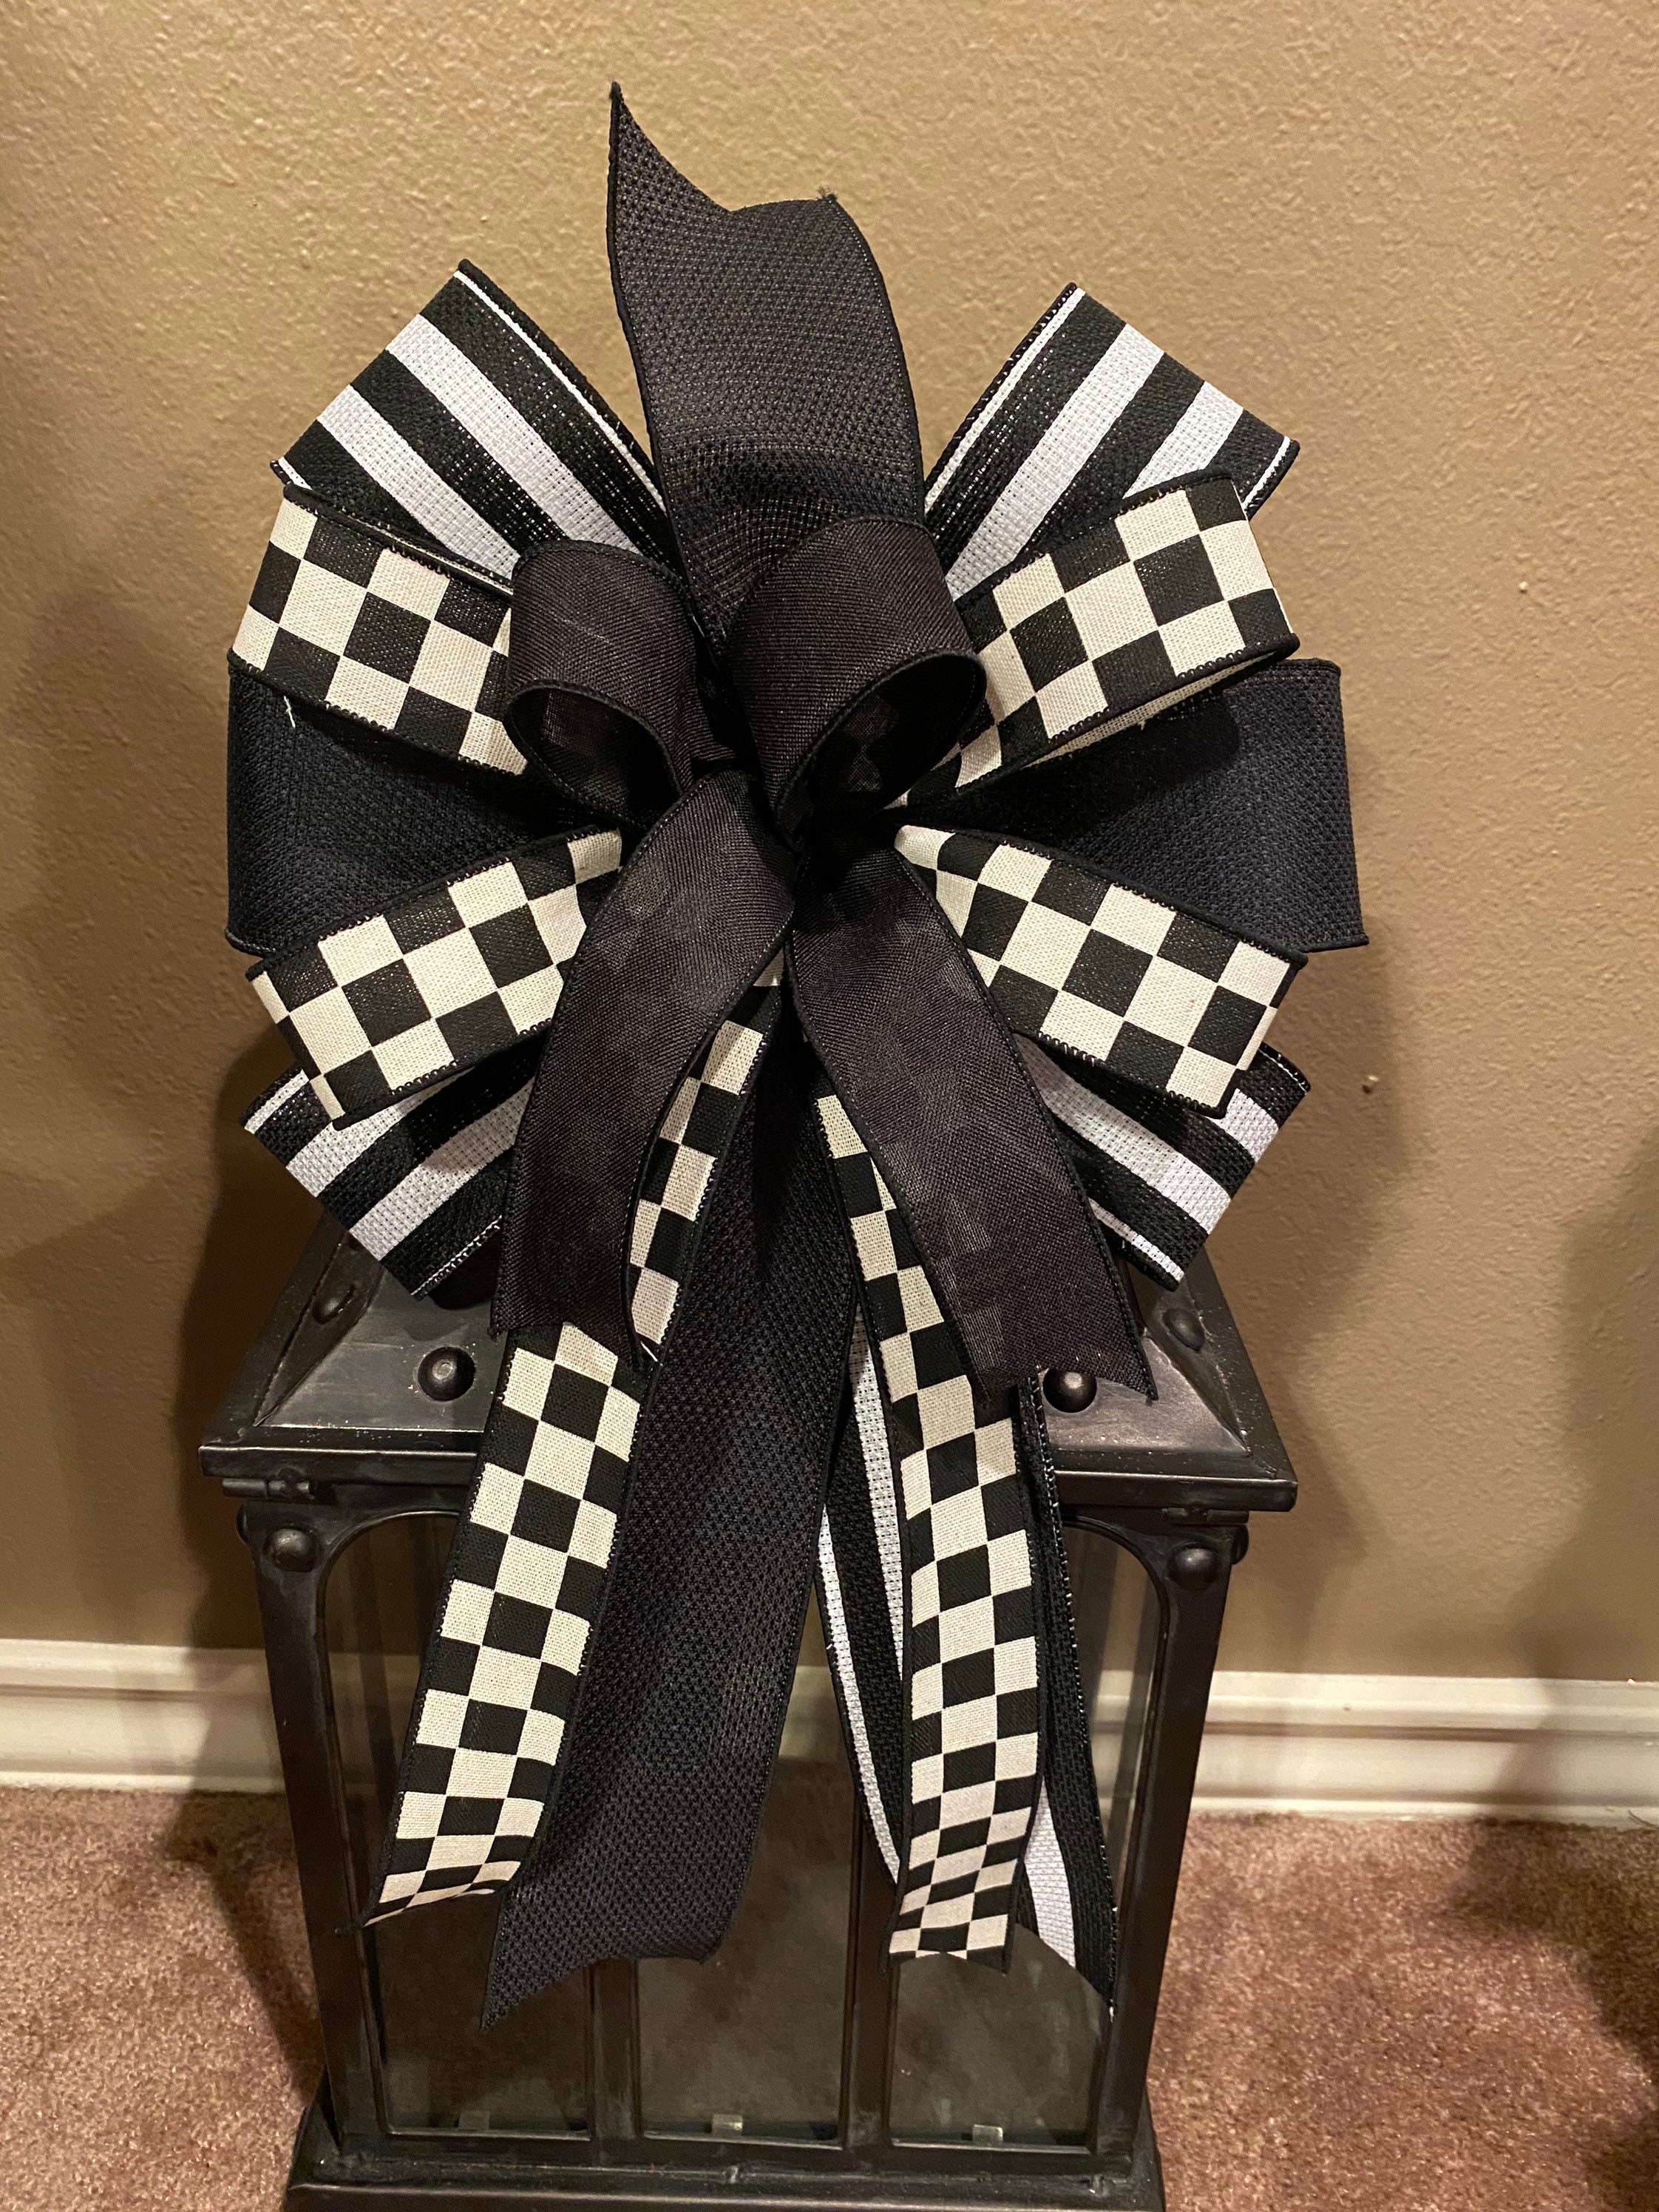 2 Wired Checkered Ribbon 2 Black and White Ribbon 2 Wired Ribbon